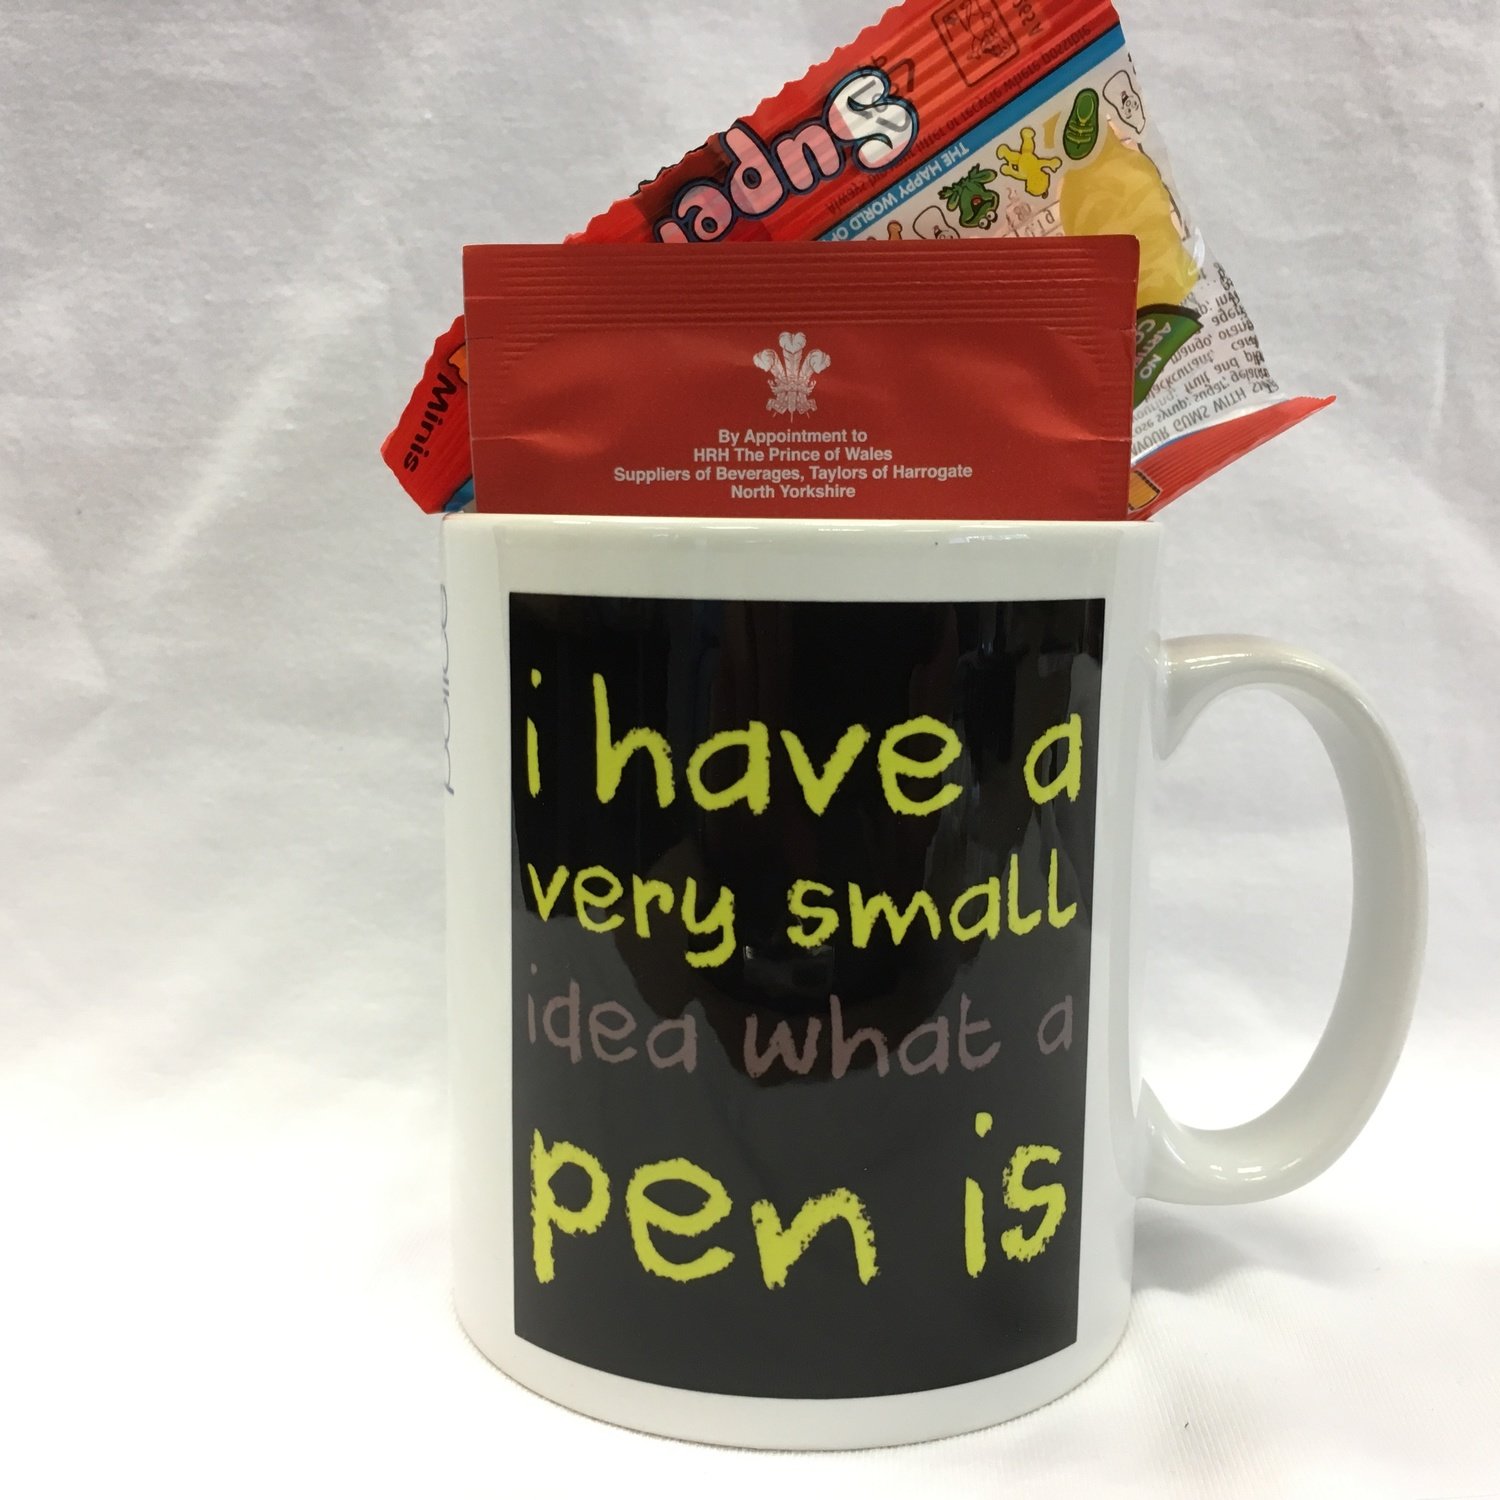 I have a Very Small Idea What a Pen Is Mug